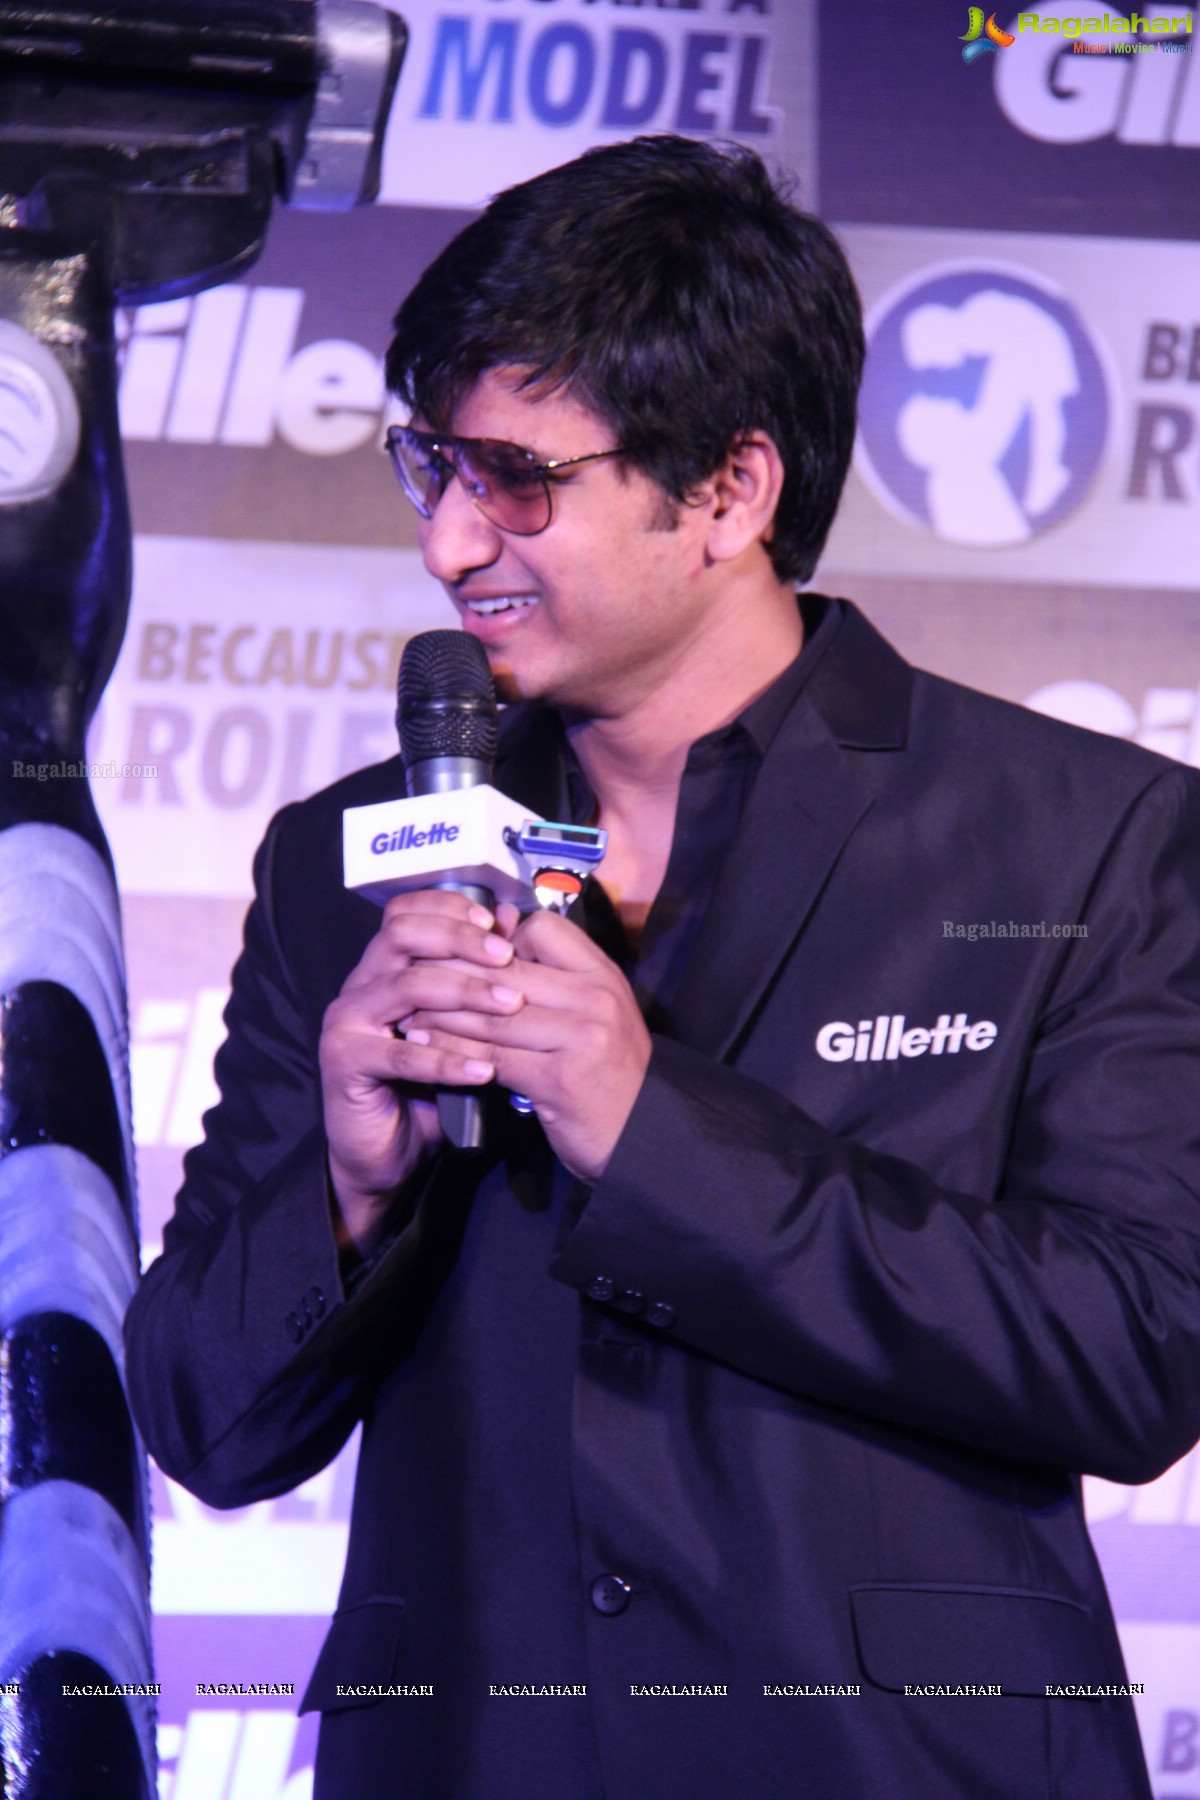 Gillette 'Because You Are A Role Model' Event with VVS Laxman and Nikhil